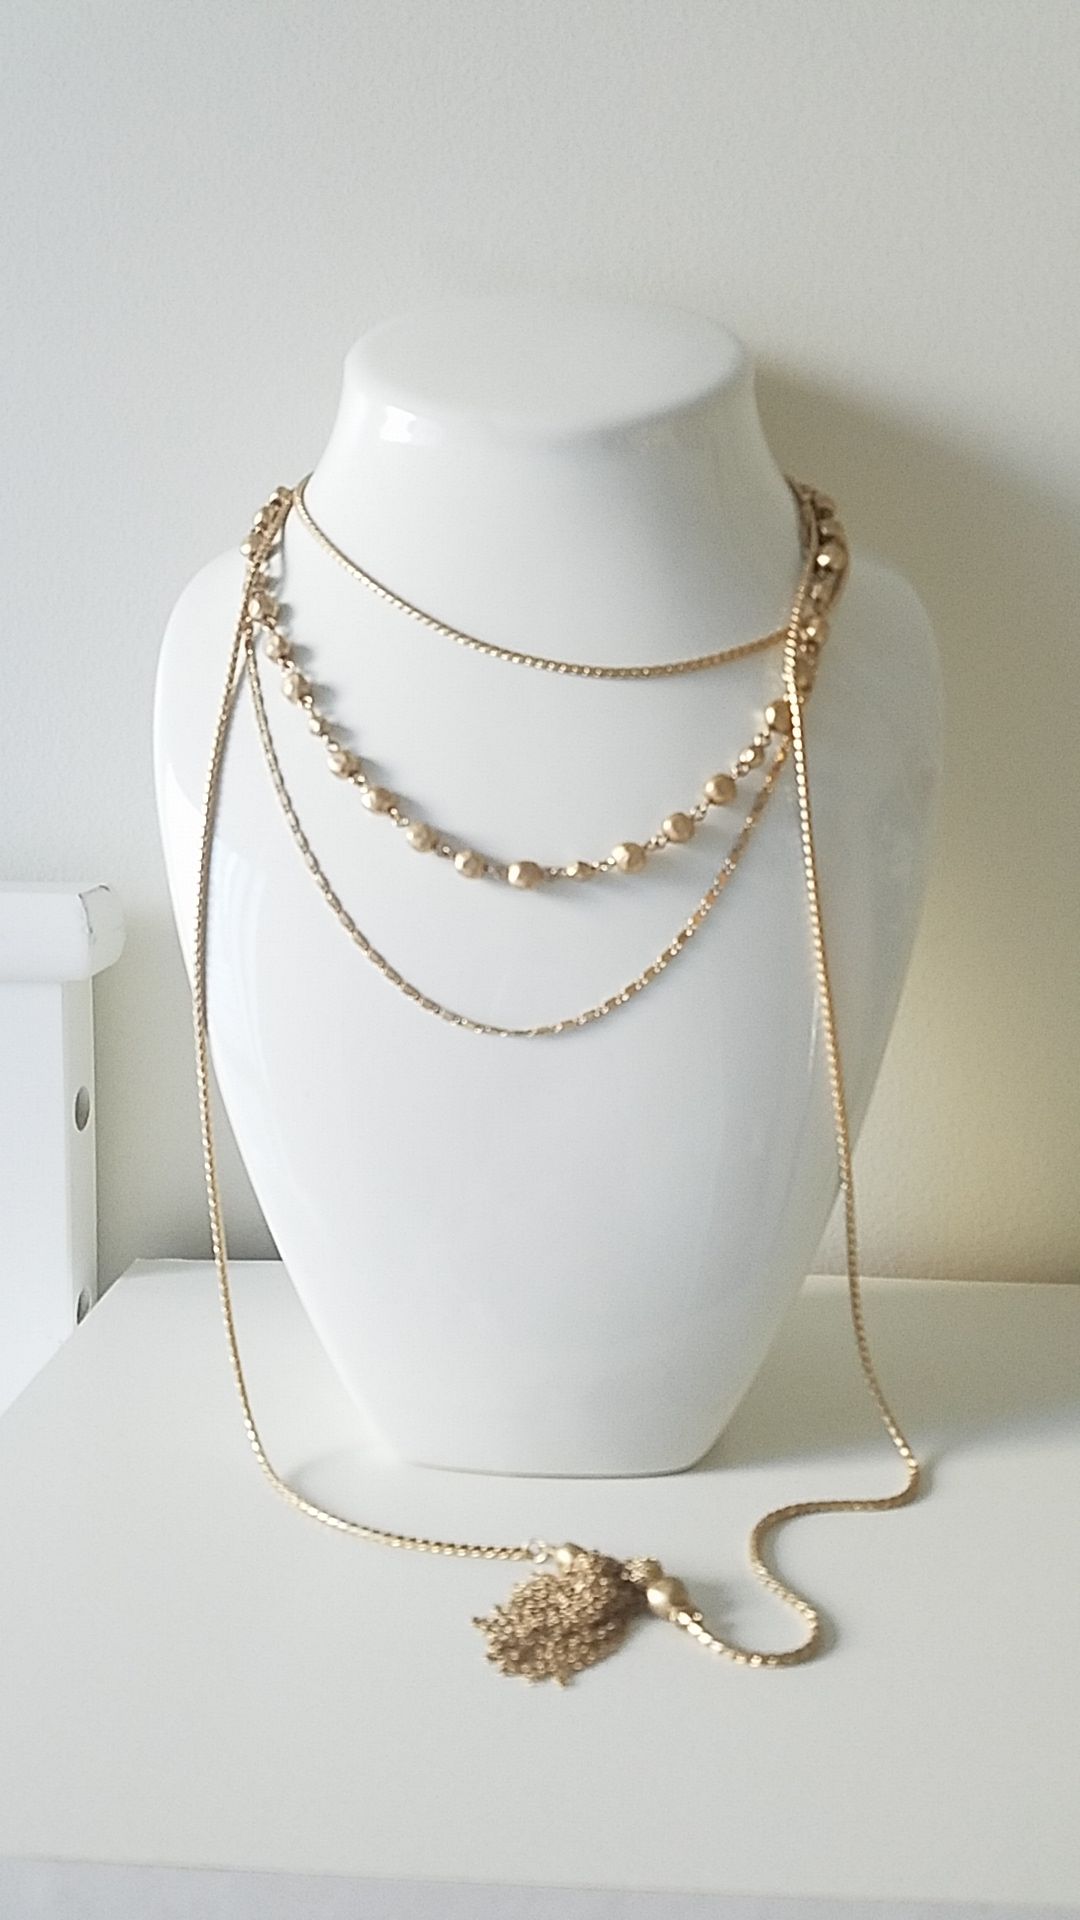 Long multi chain tassel fangled necklace from Nordstrom in matte gold